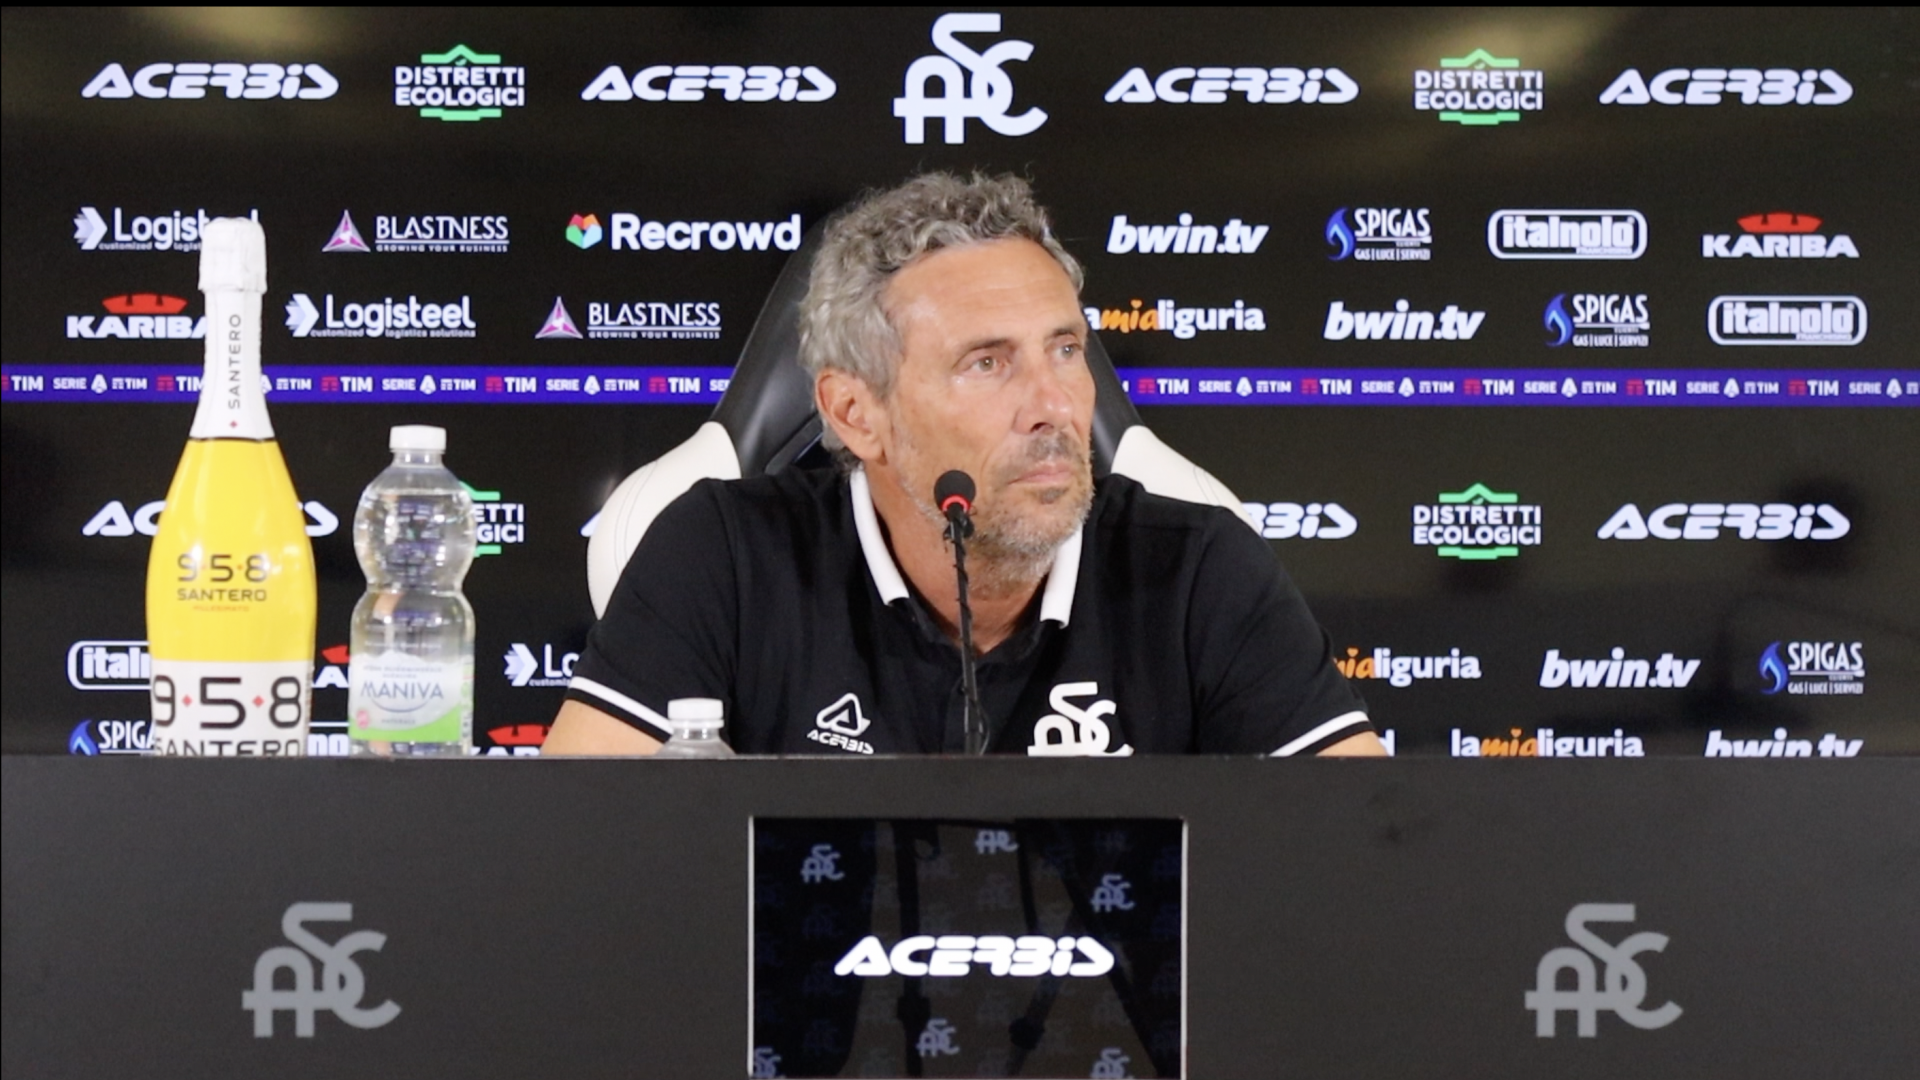 Gotti: “Trust and esteem from the Ownership; now to Naples with attention and courage”